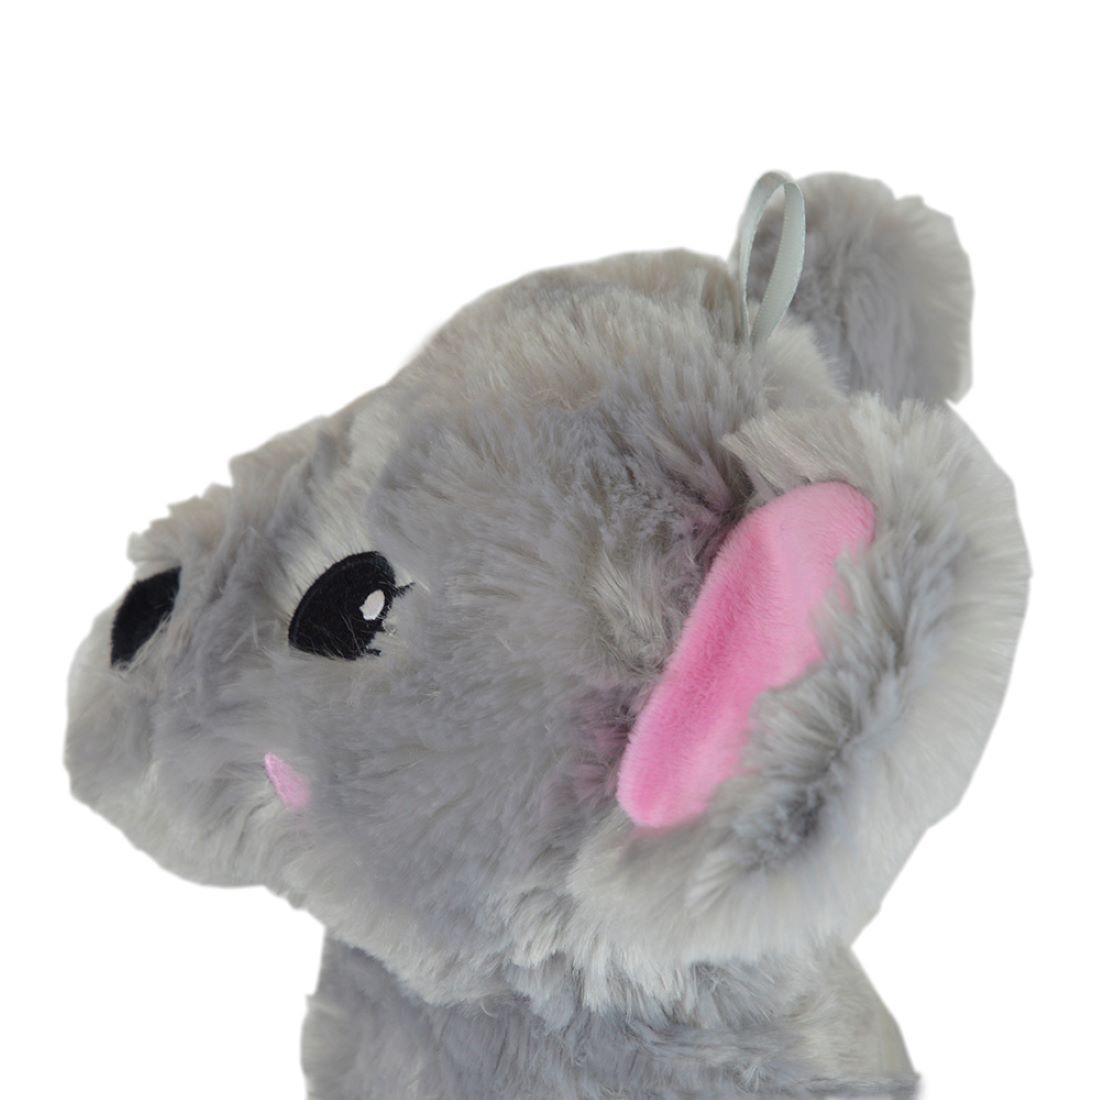 Hot Water Bottle with Plush Mouse Removable Cover